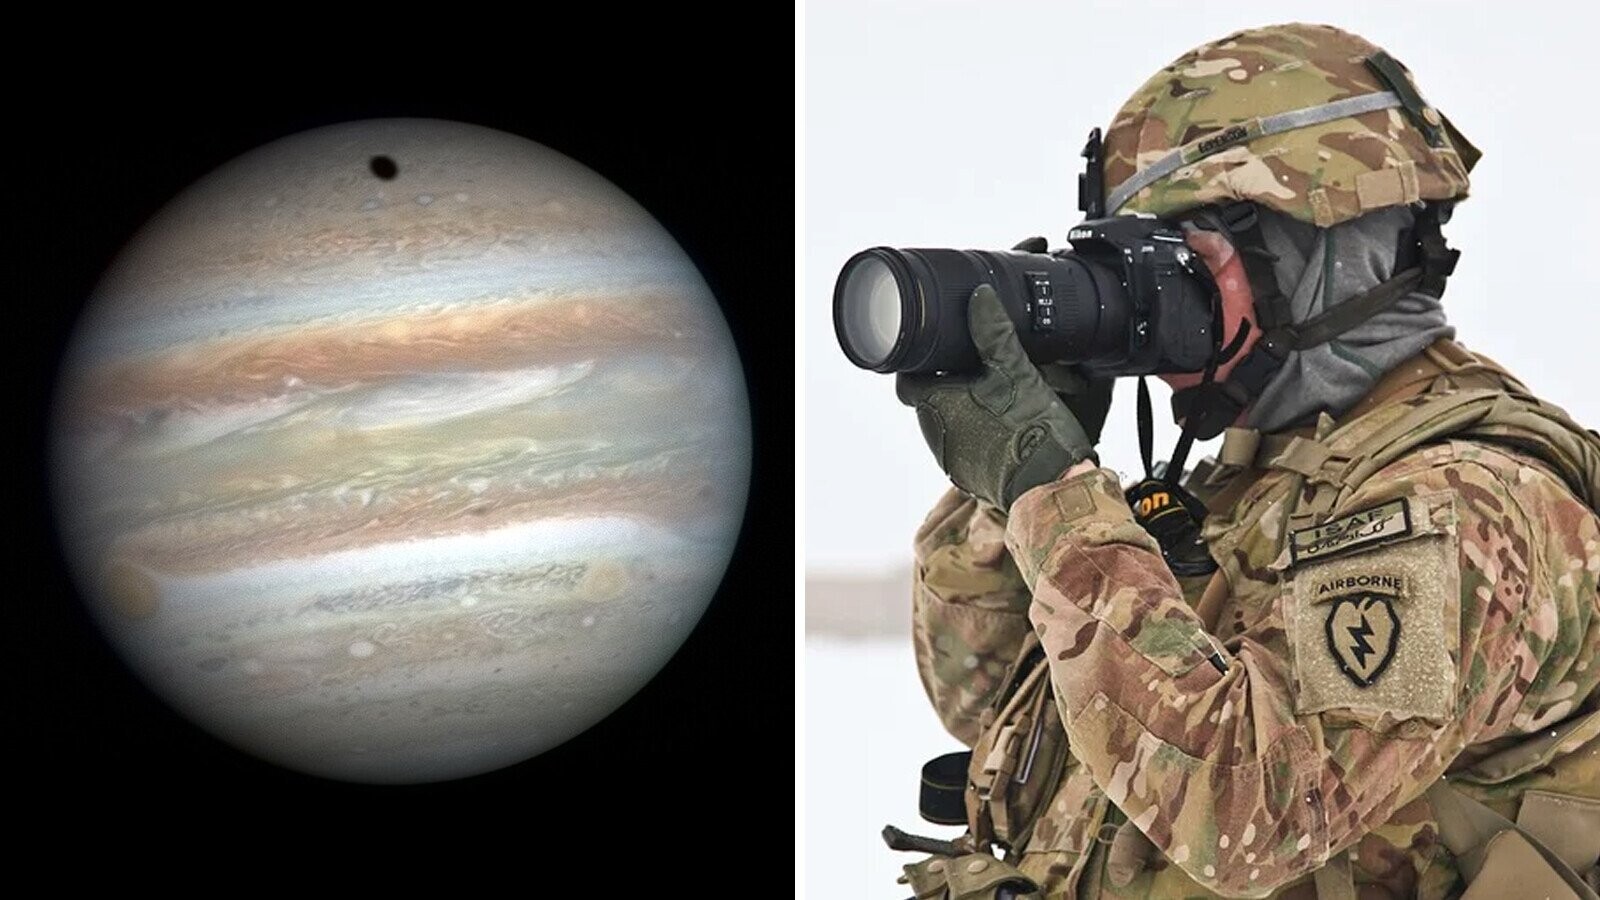 With Jupiter Passing So Close To Earth, It's Time To Attack - Cracked.com